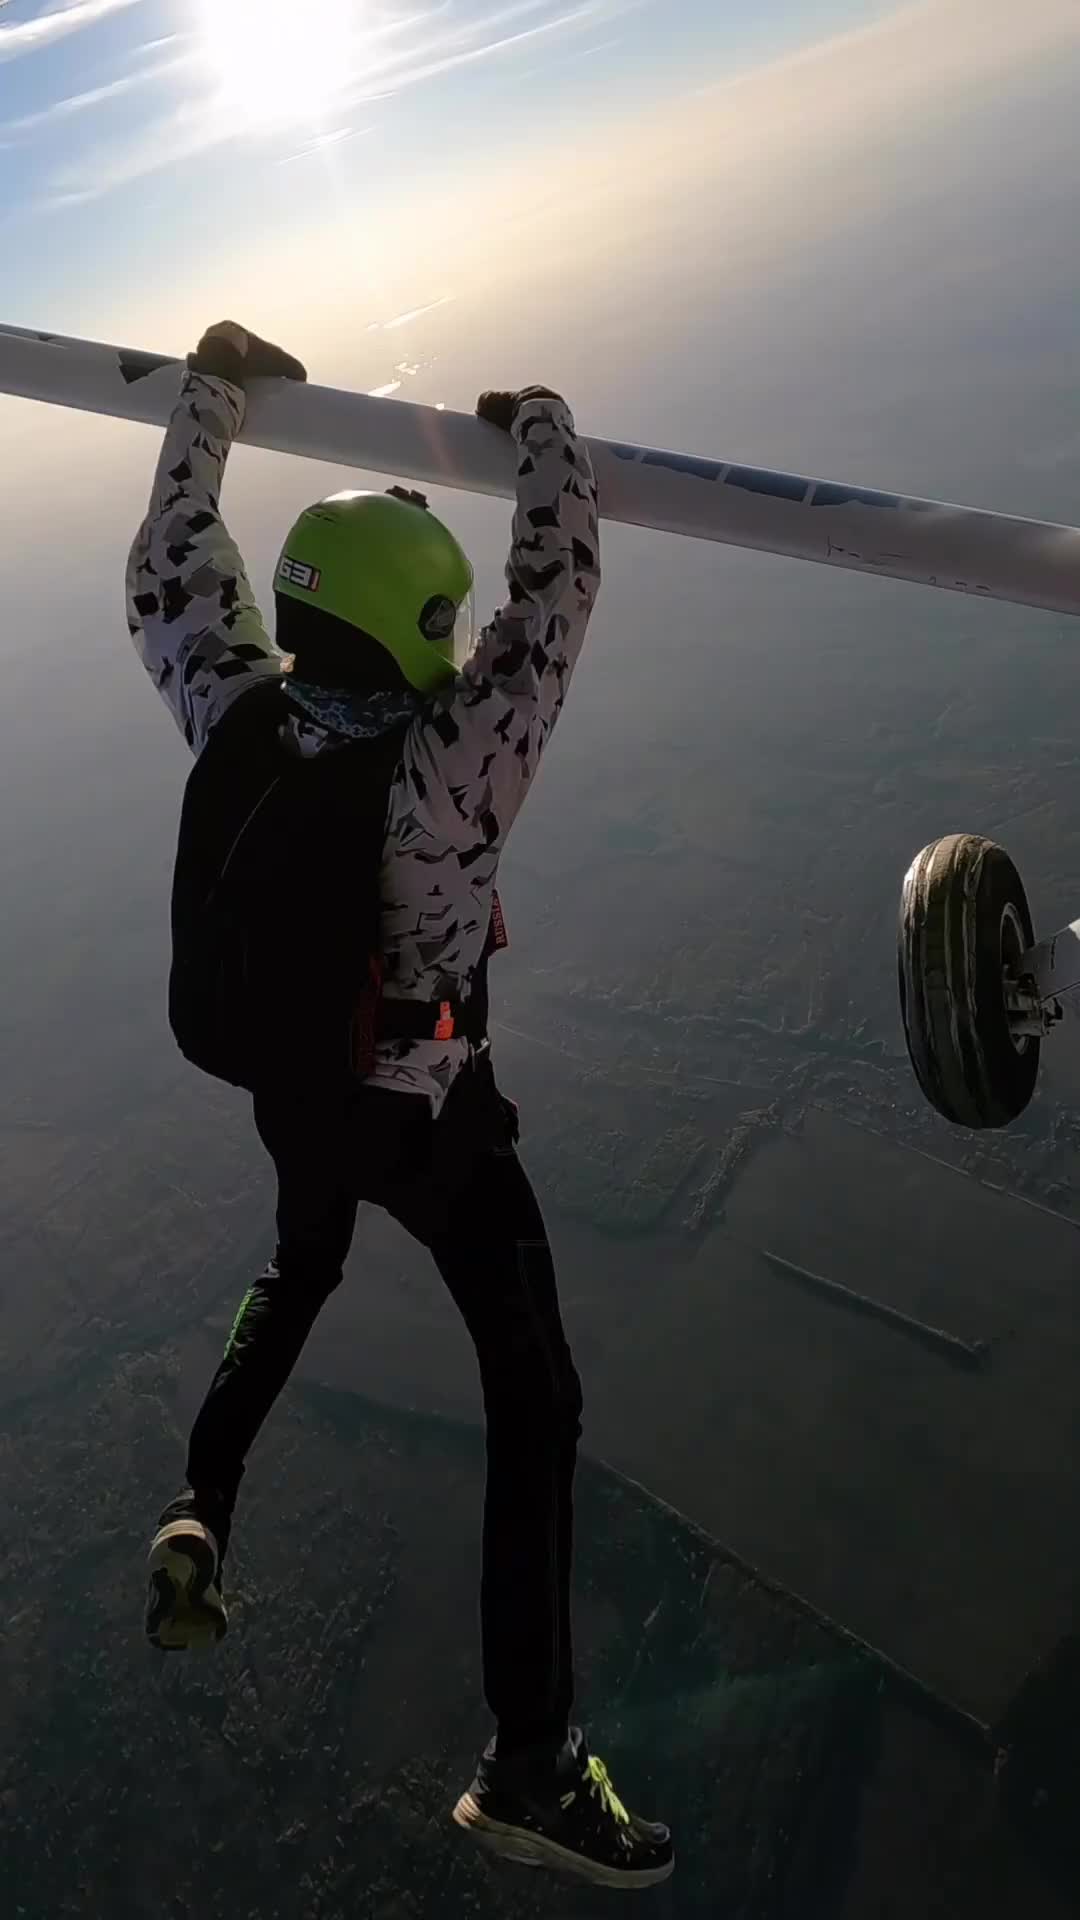 Skydiving in Russia: Extreme Sports Adventure